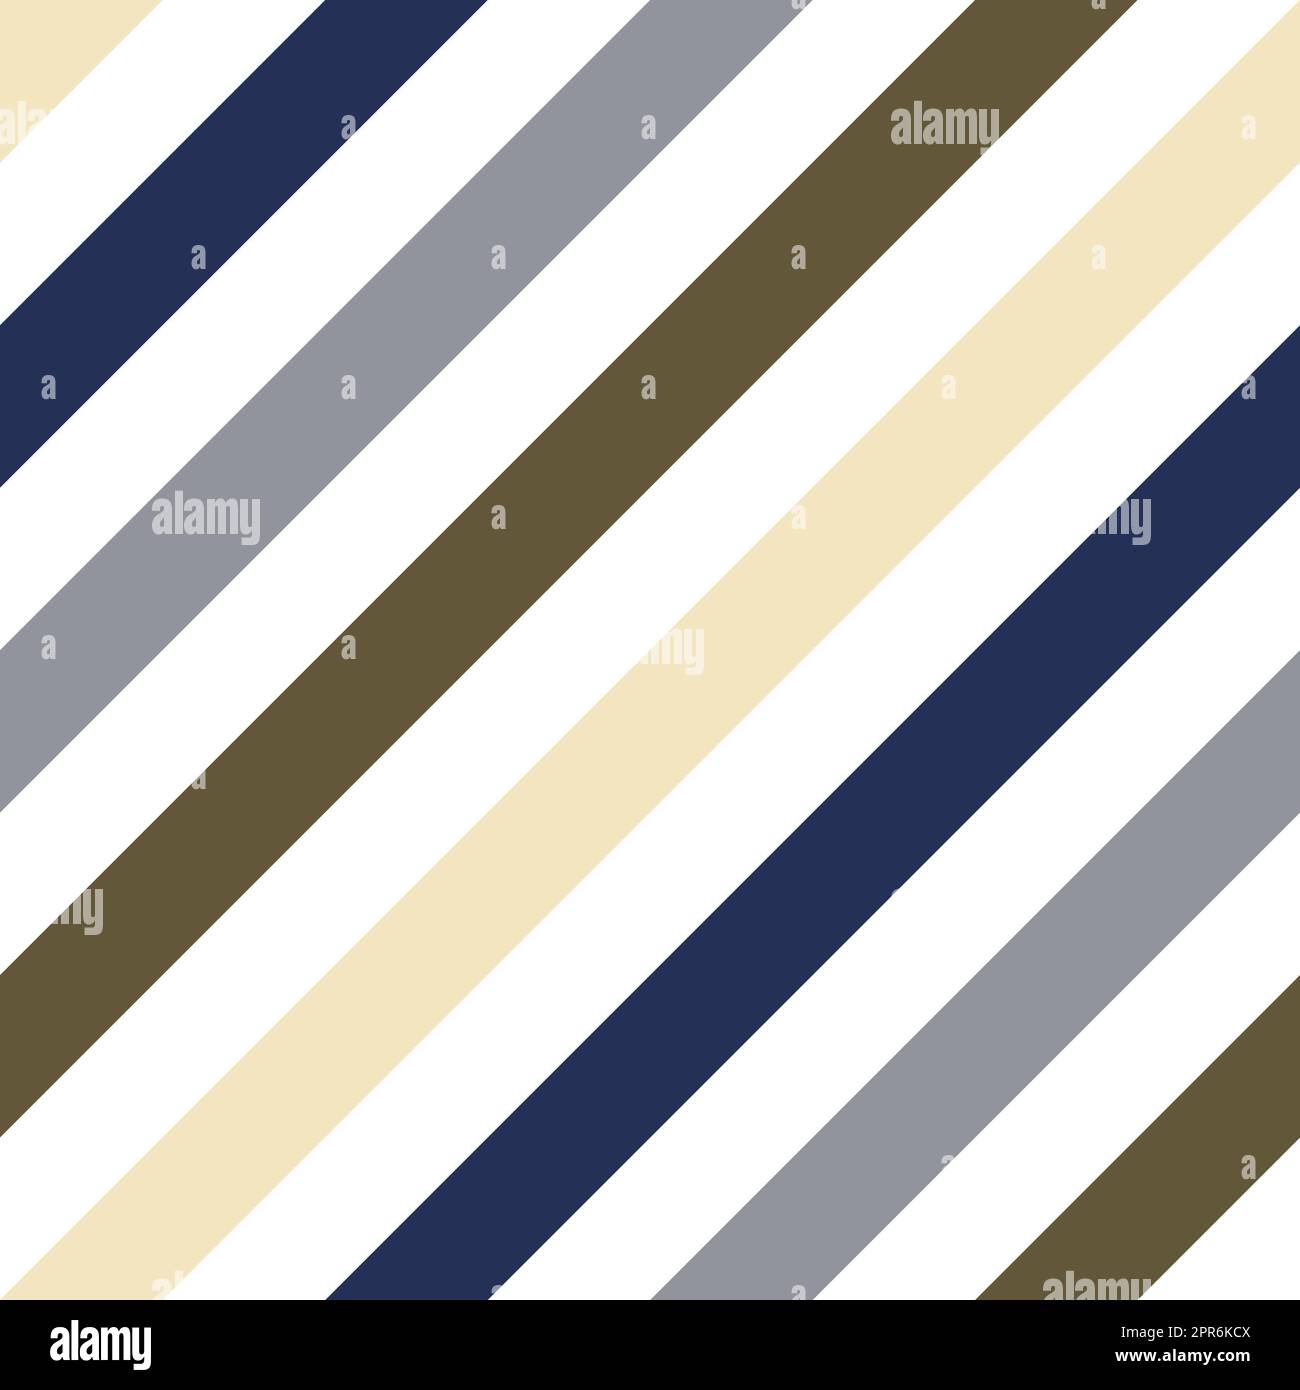 Pattern diagonal stripe seamless. Contrasting cream, blue, gray and olive green color on a white background. Stock Photo